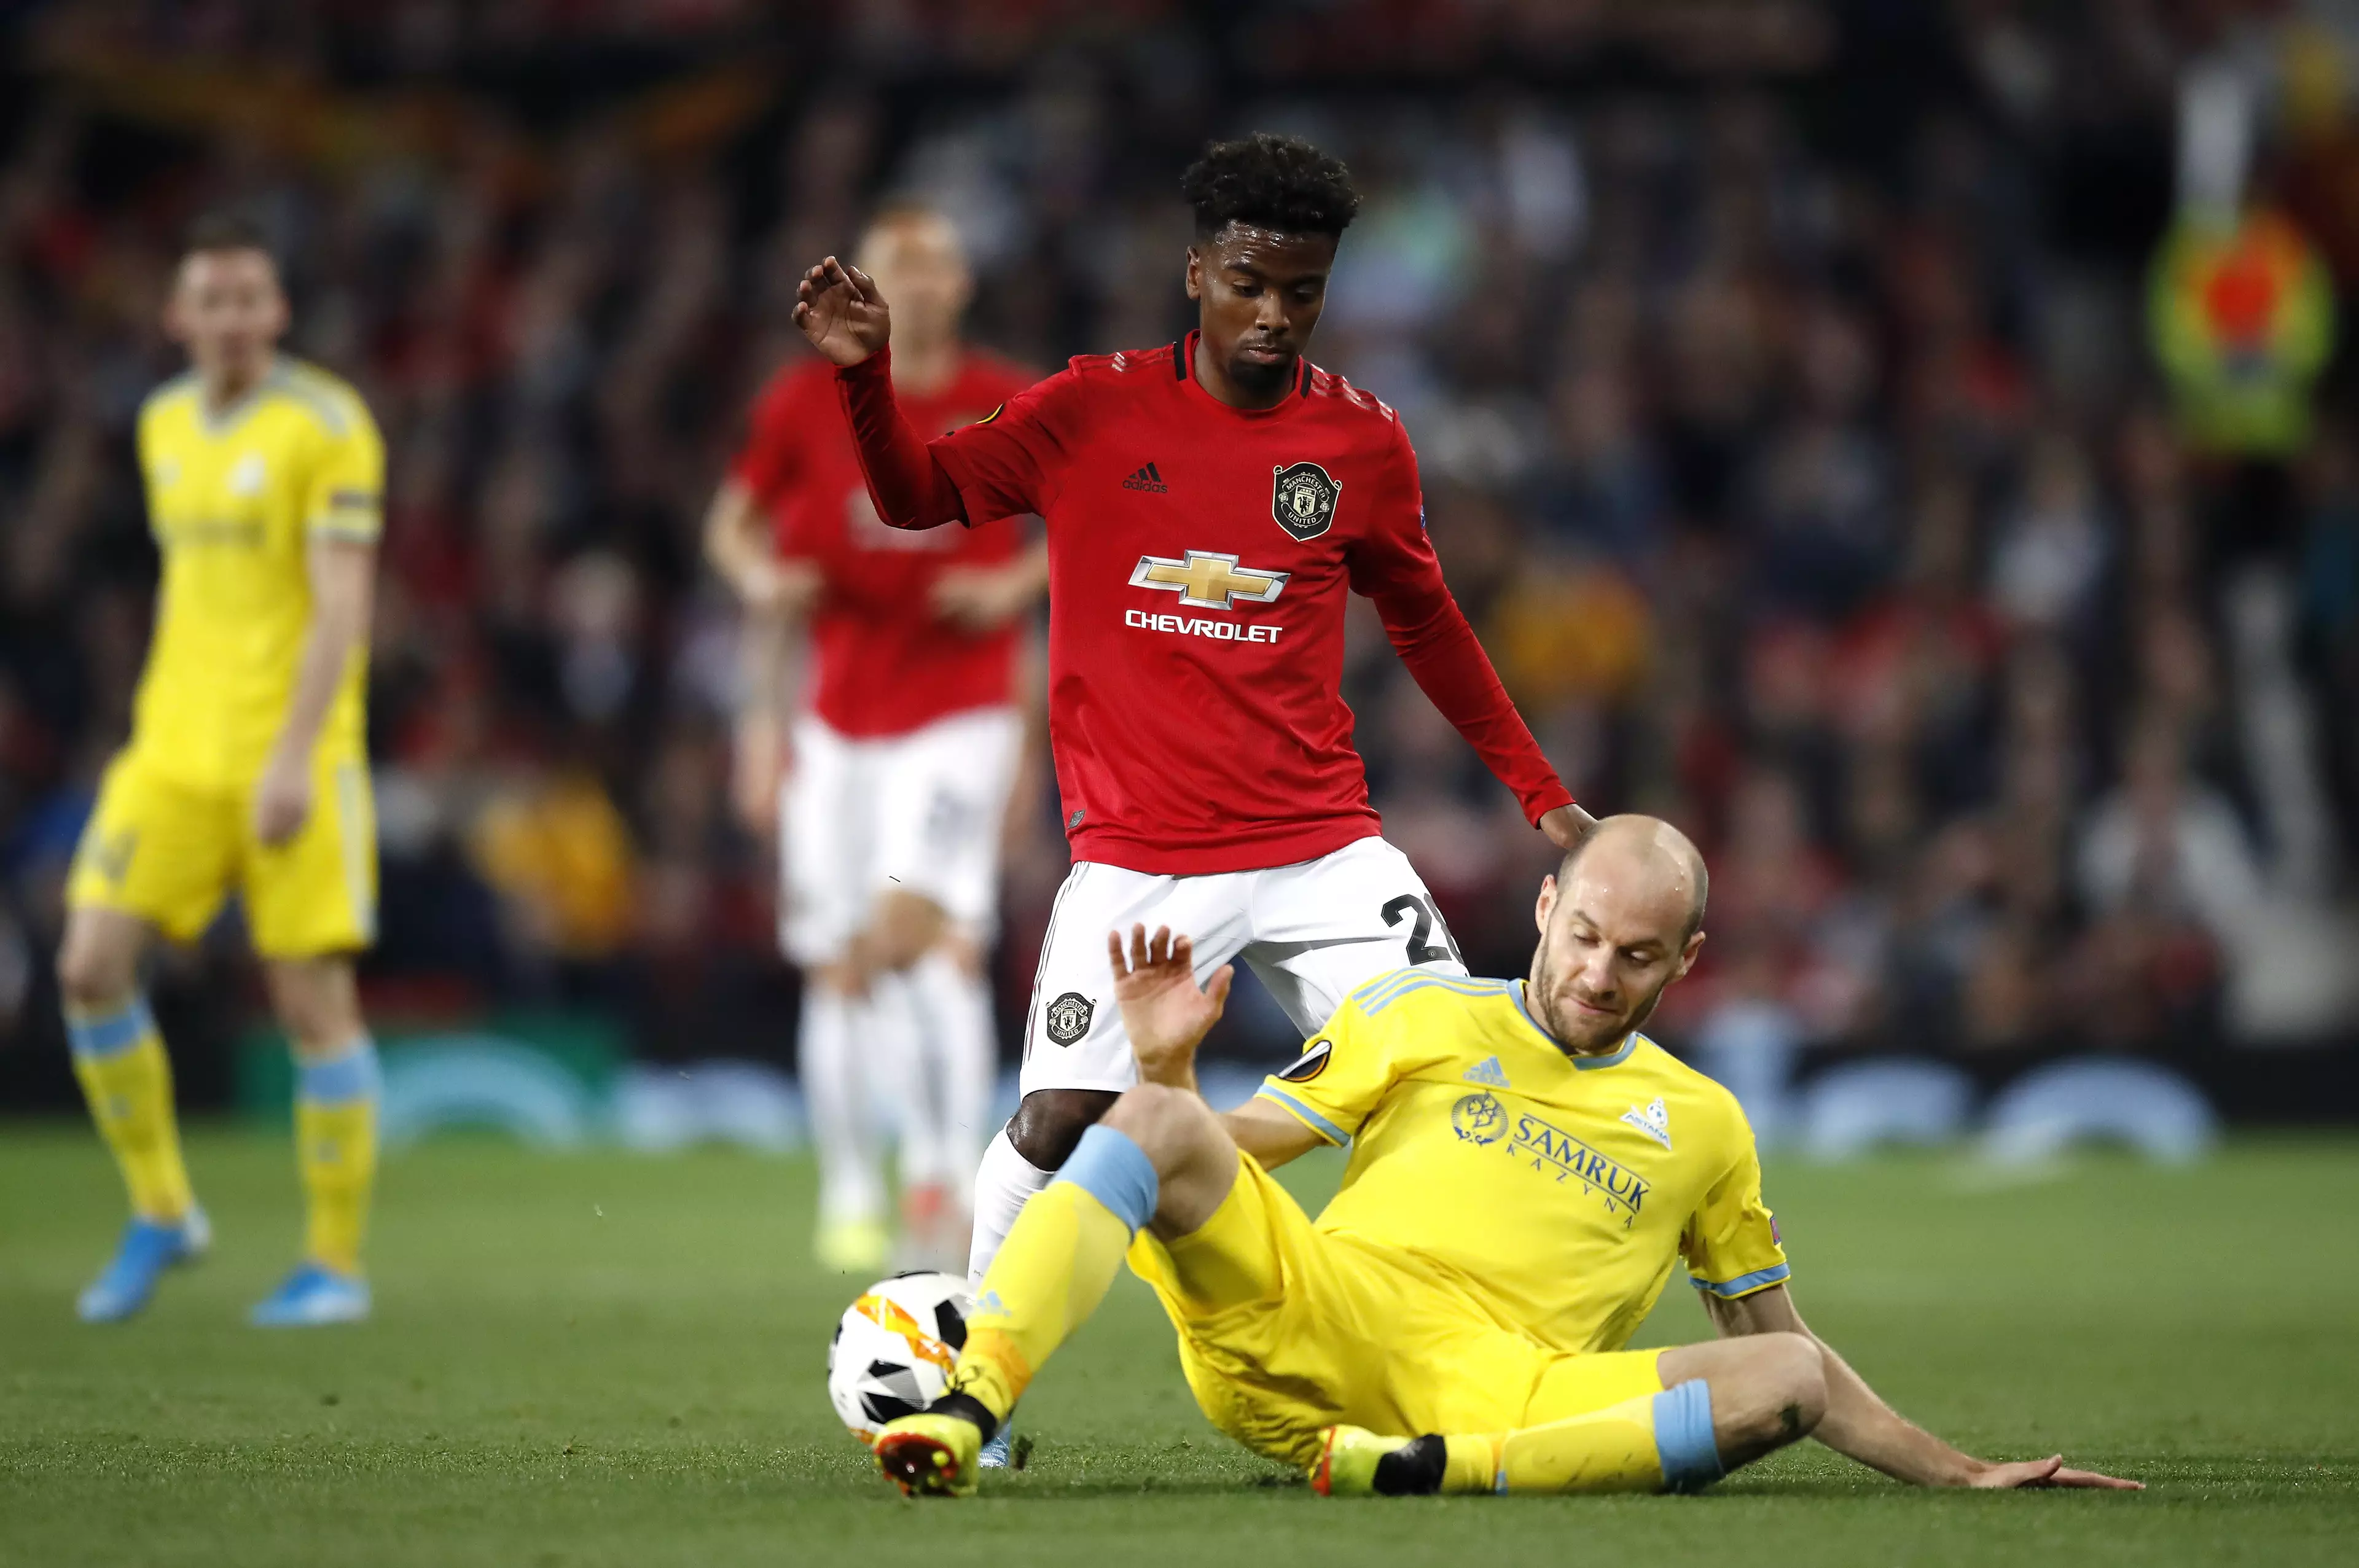 Gomes has made six appearances for United in all competitions this season. (Image